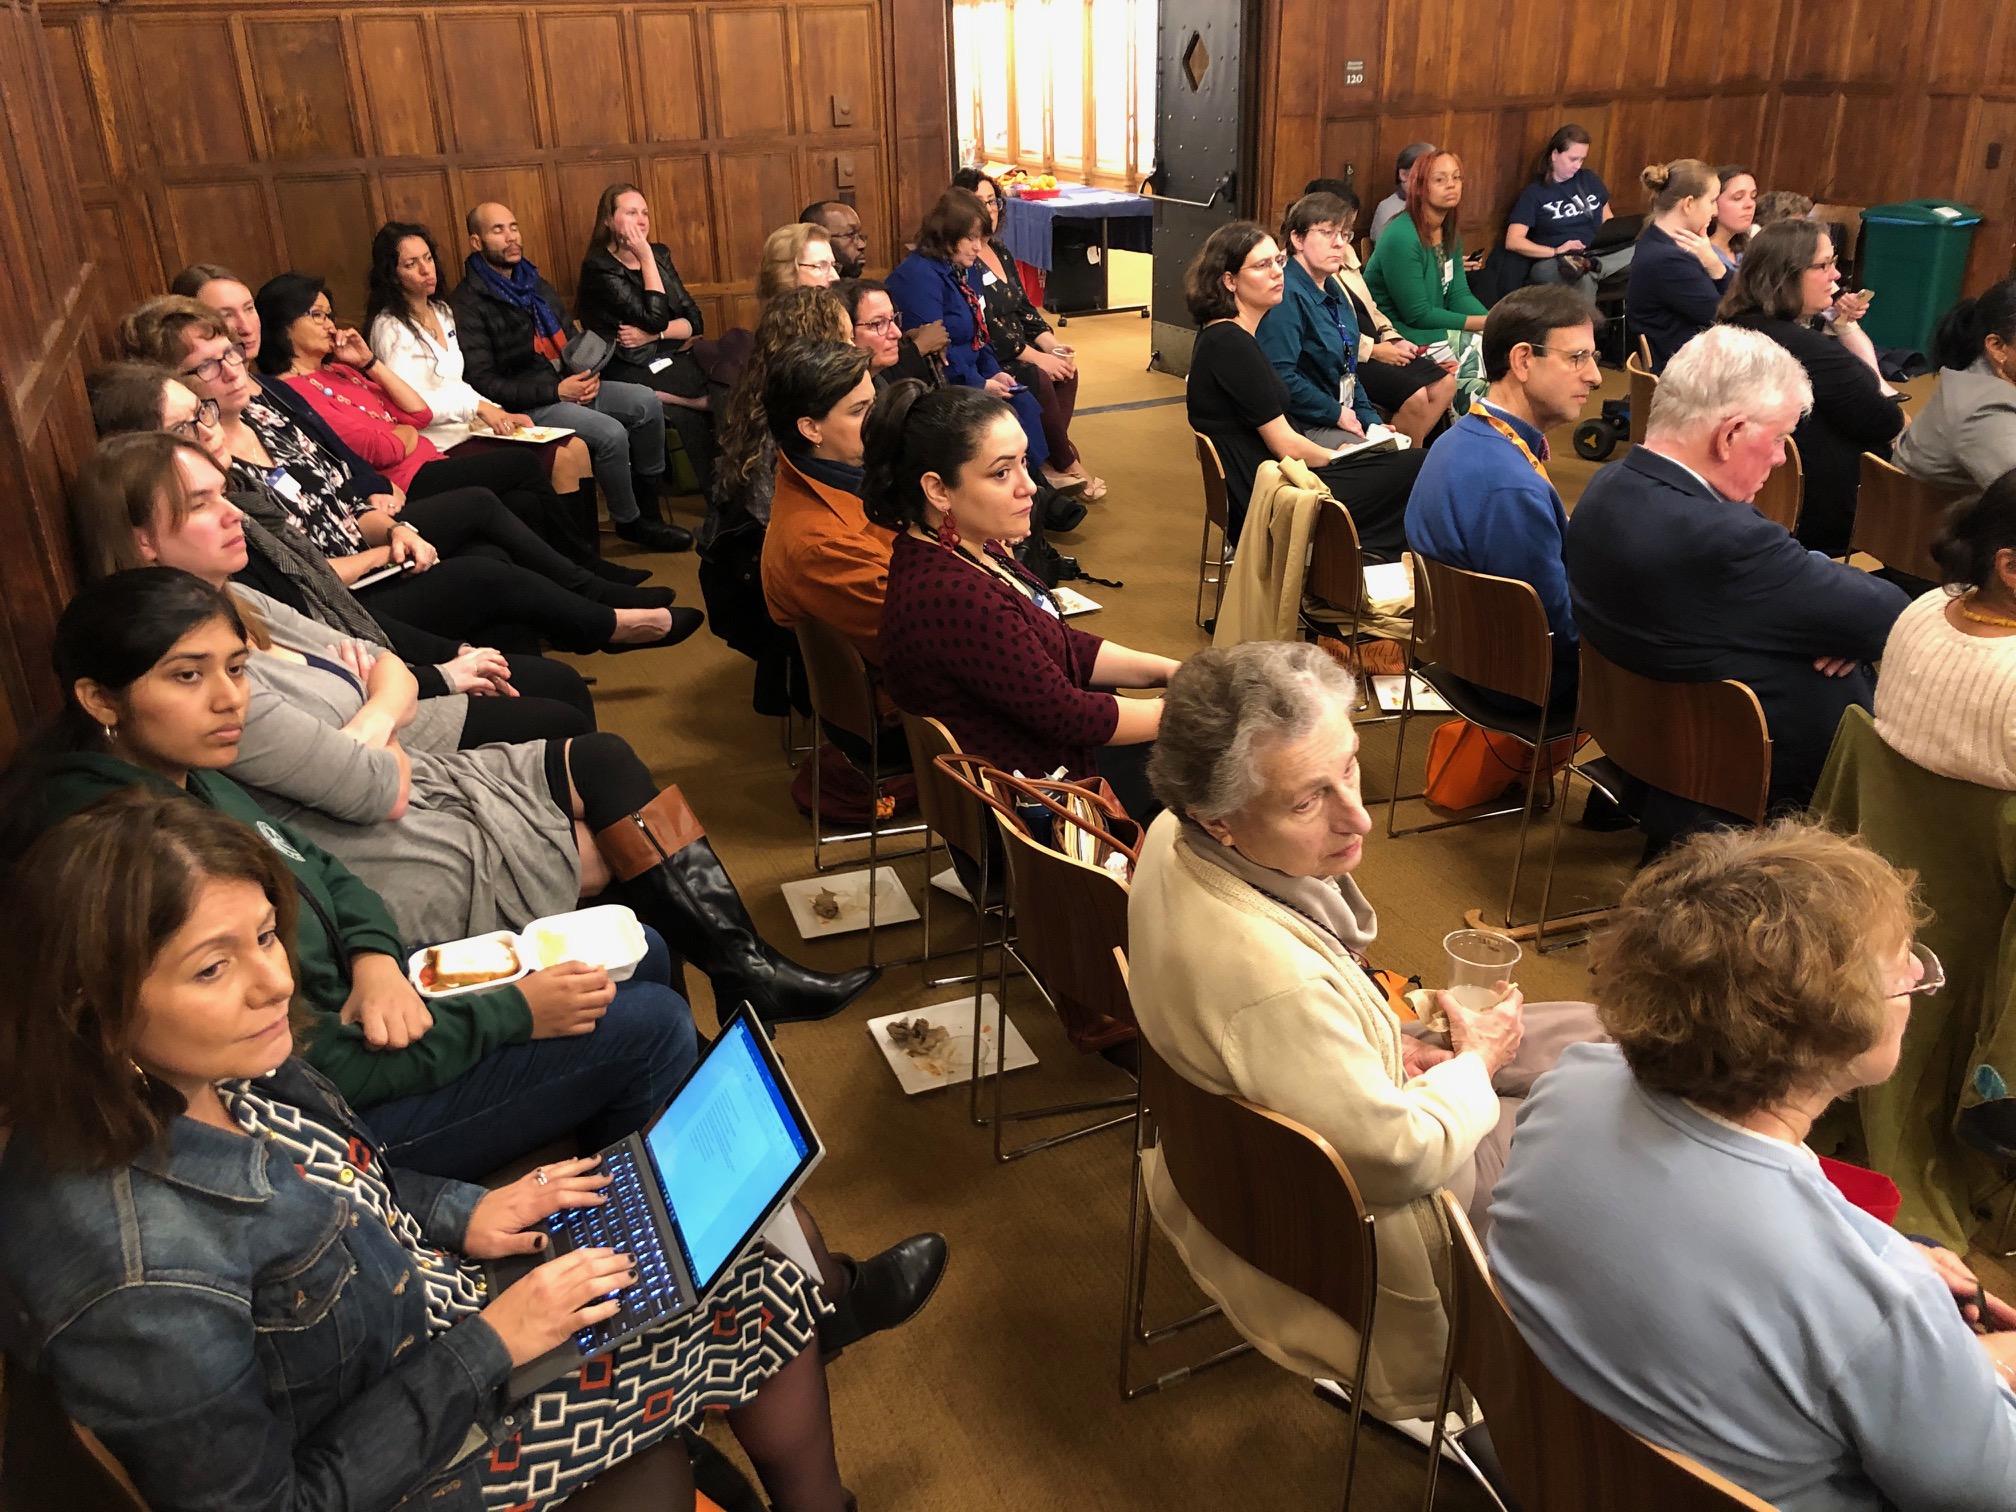 Attendees at the DiversAbility: Addressing Disability, Equity, and Inclusion at Yale and Beyond panel program on campus. Photo: Henry Kwan